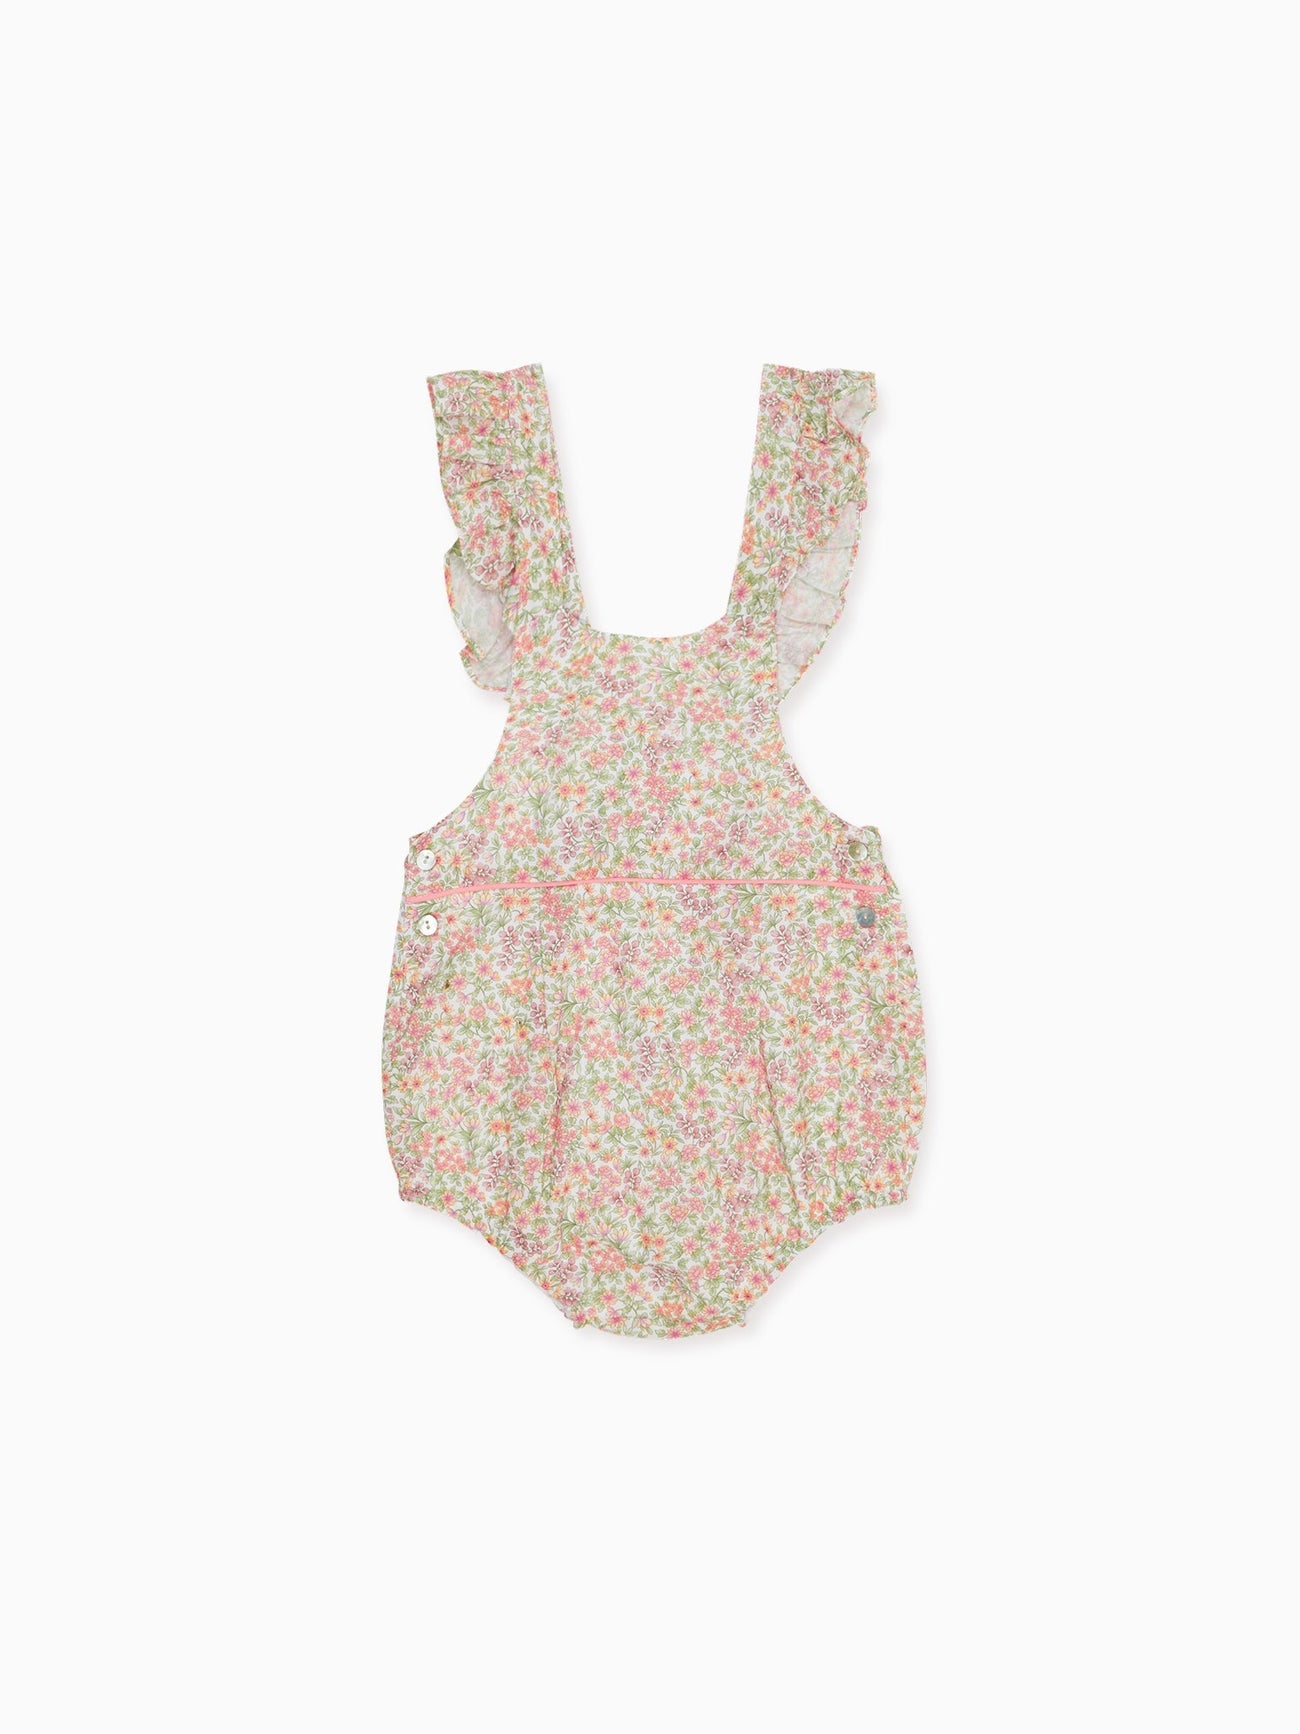 Pink Floral Rontina Baby Girl Romper Overalls